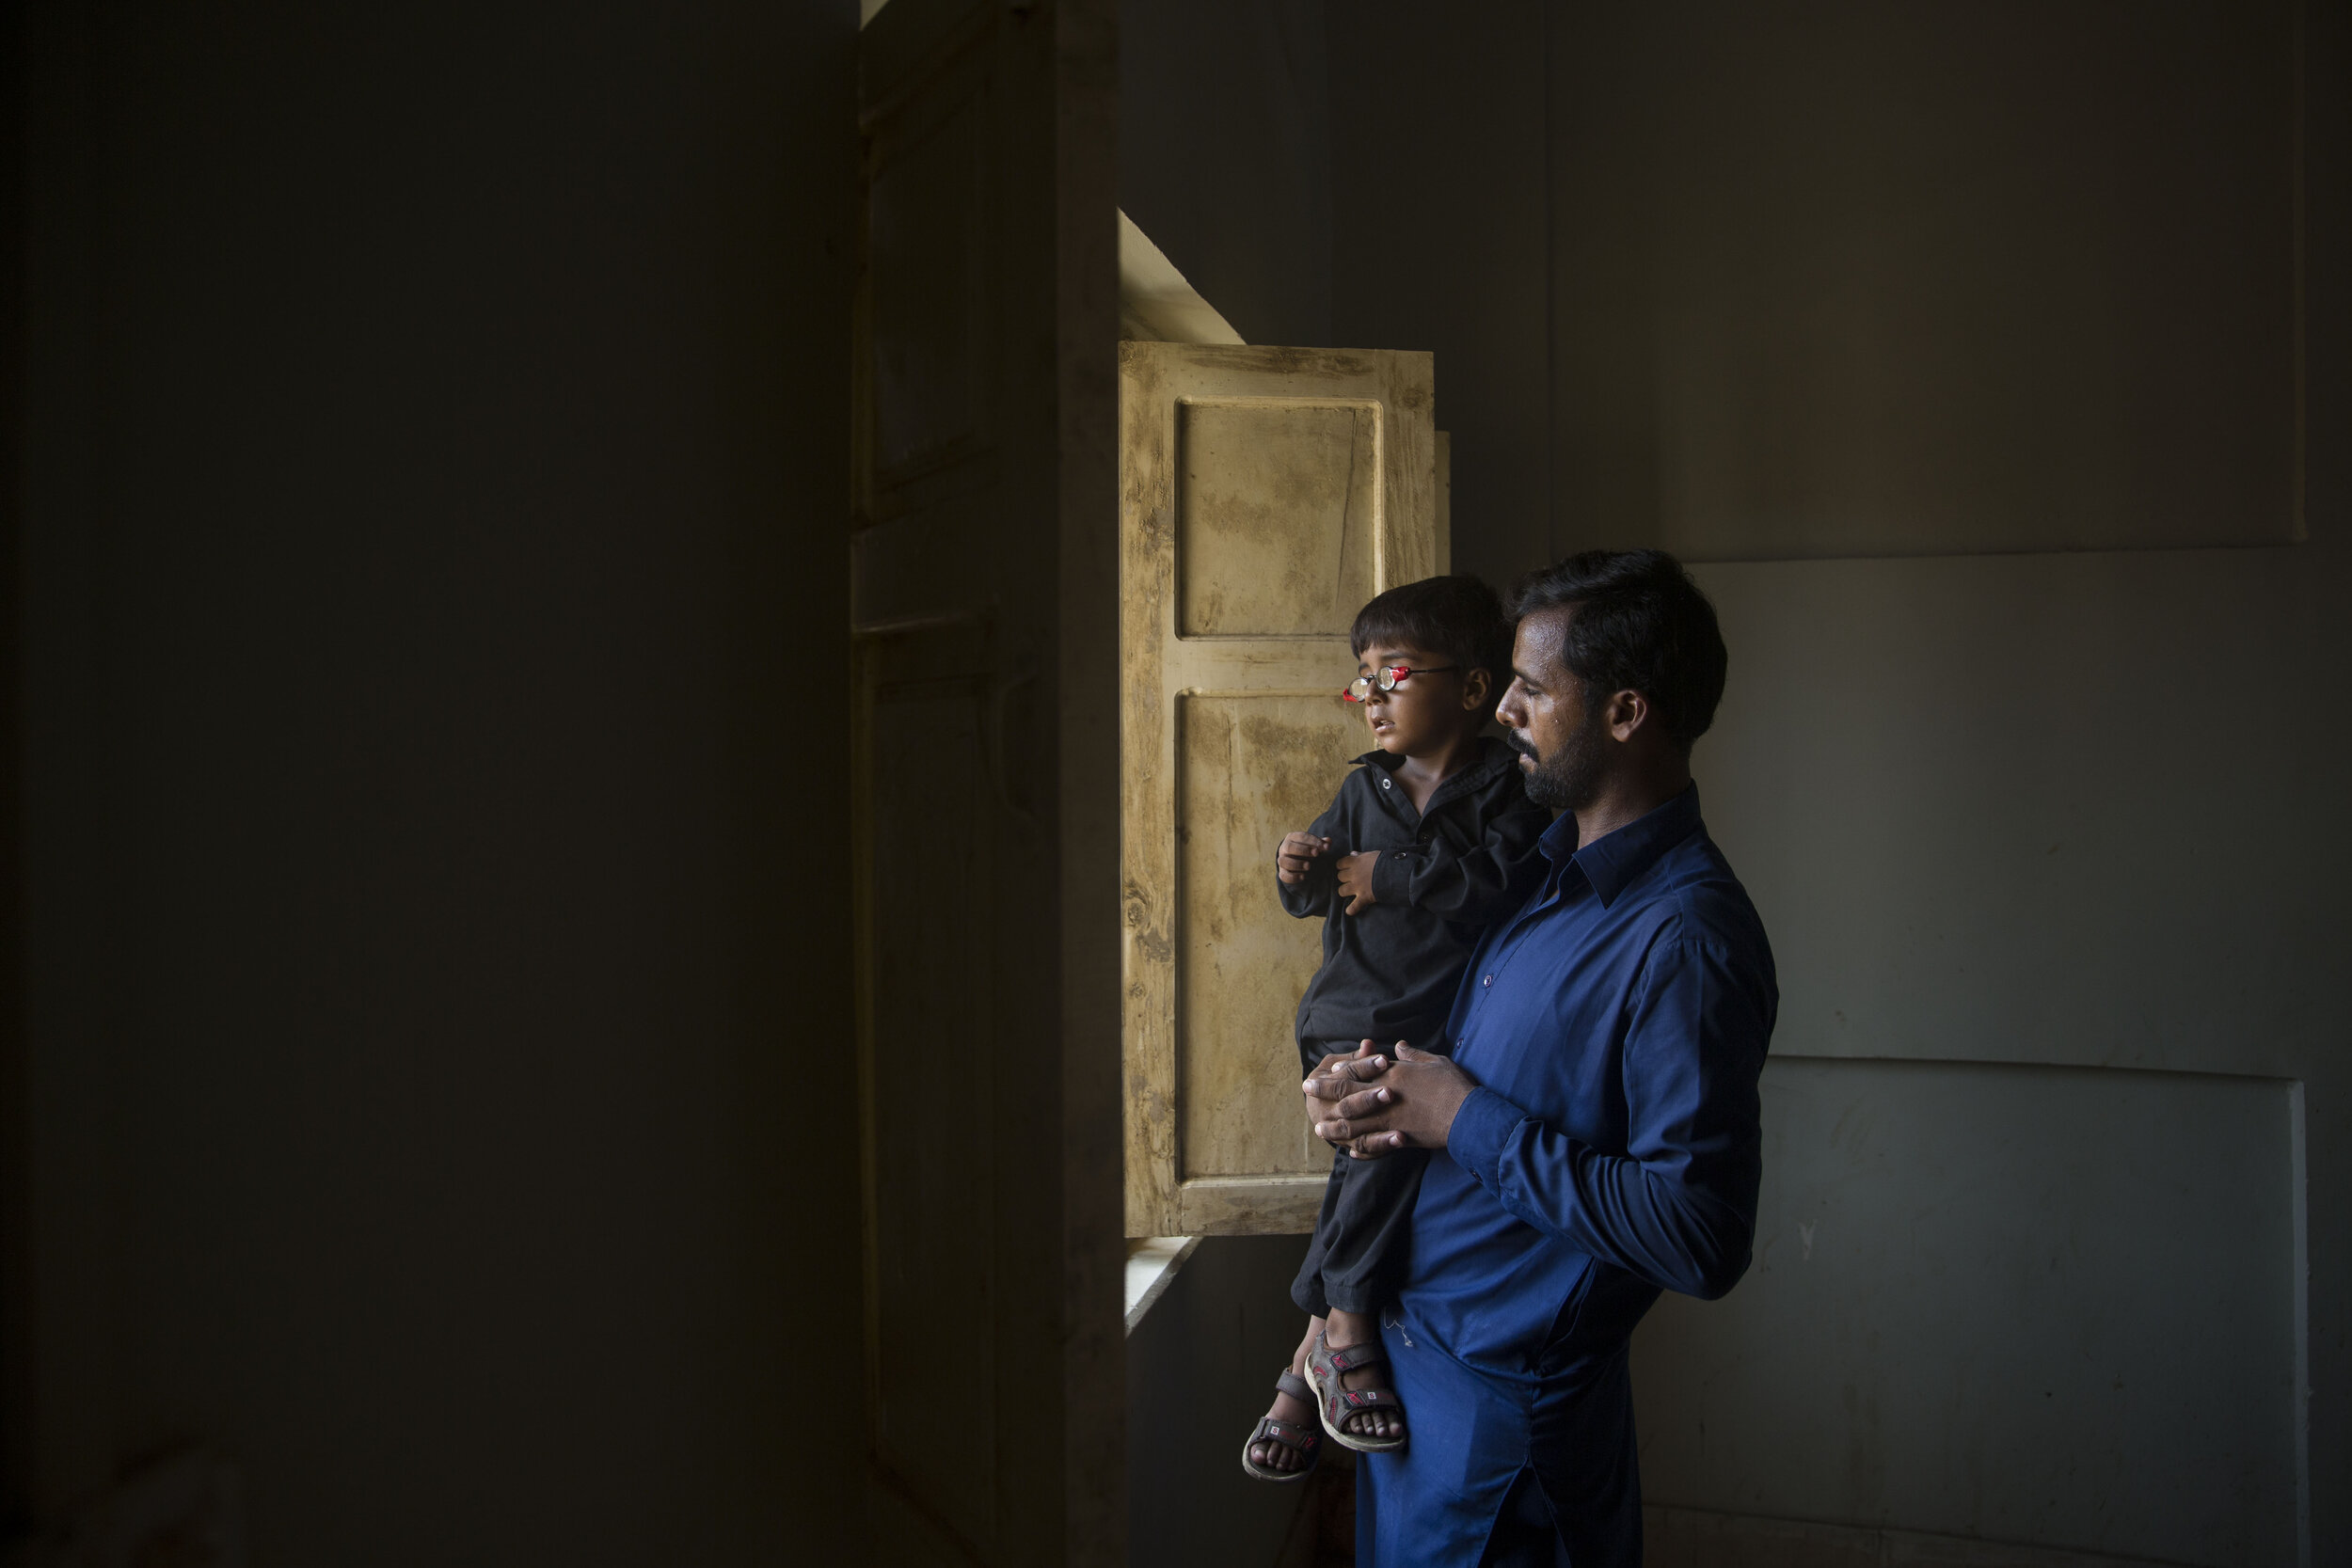  4-year-old Habibullah who has been diagnosed with HIV stands with his father and looks out the window at Sheikh Zaid Hospital on July 26, 2019 in Larkana, Sind, Pakistan. 